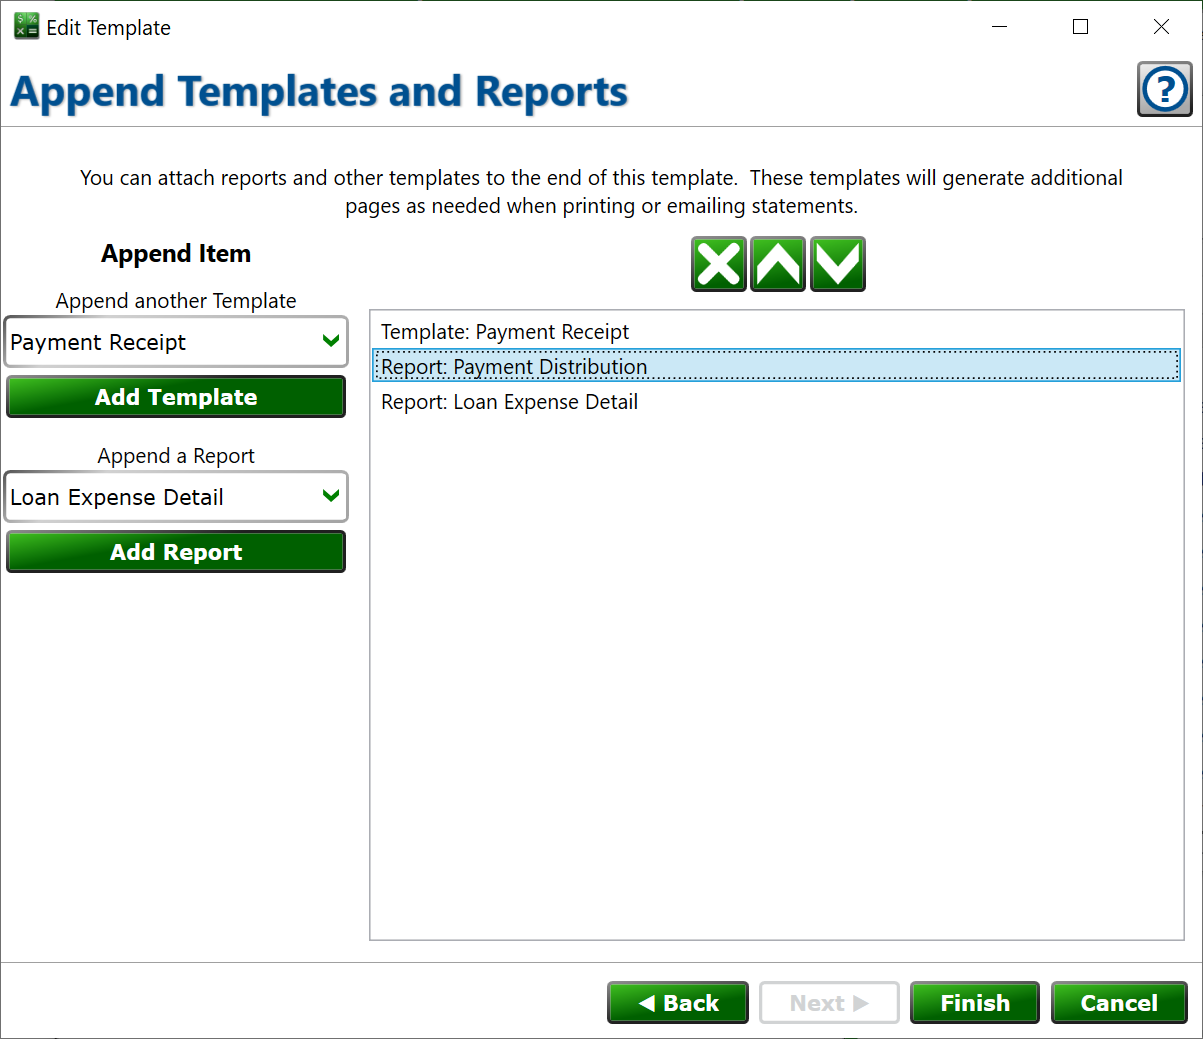 Append Templates and Reports to a Template